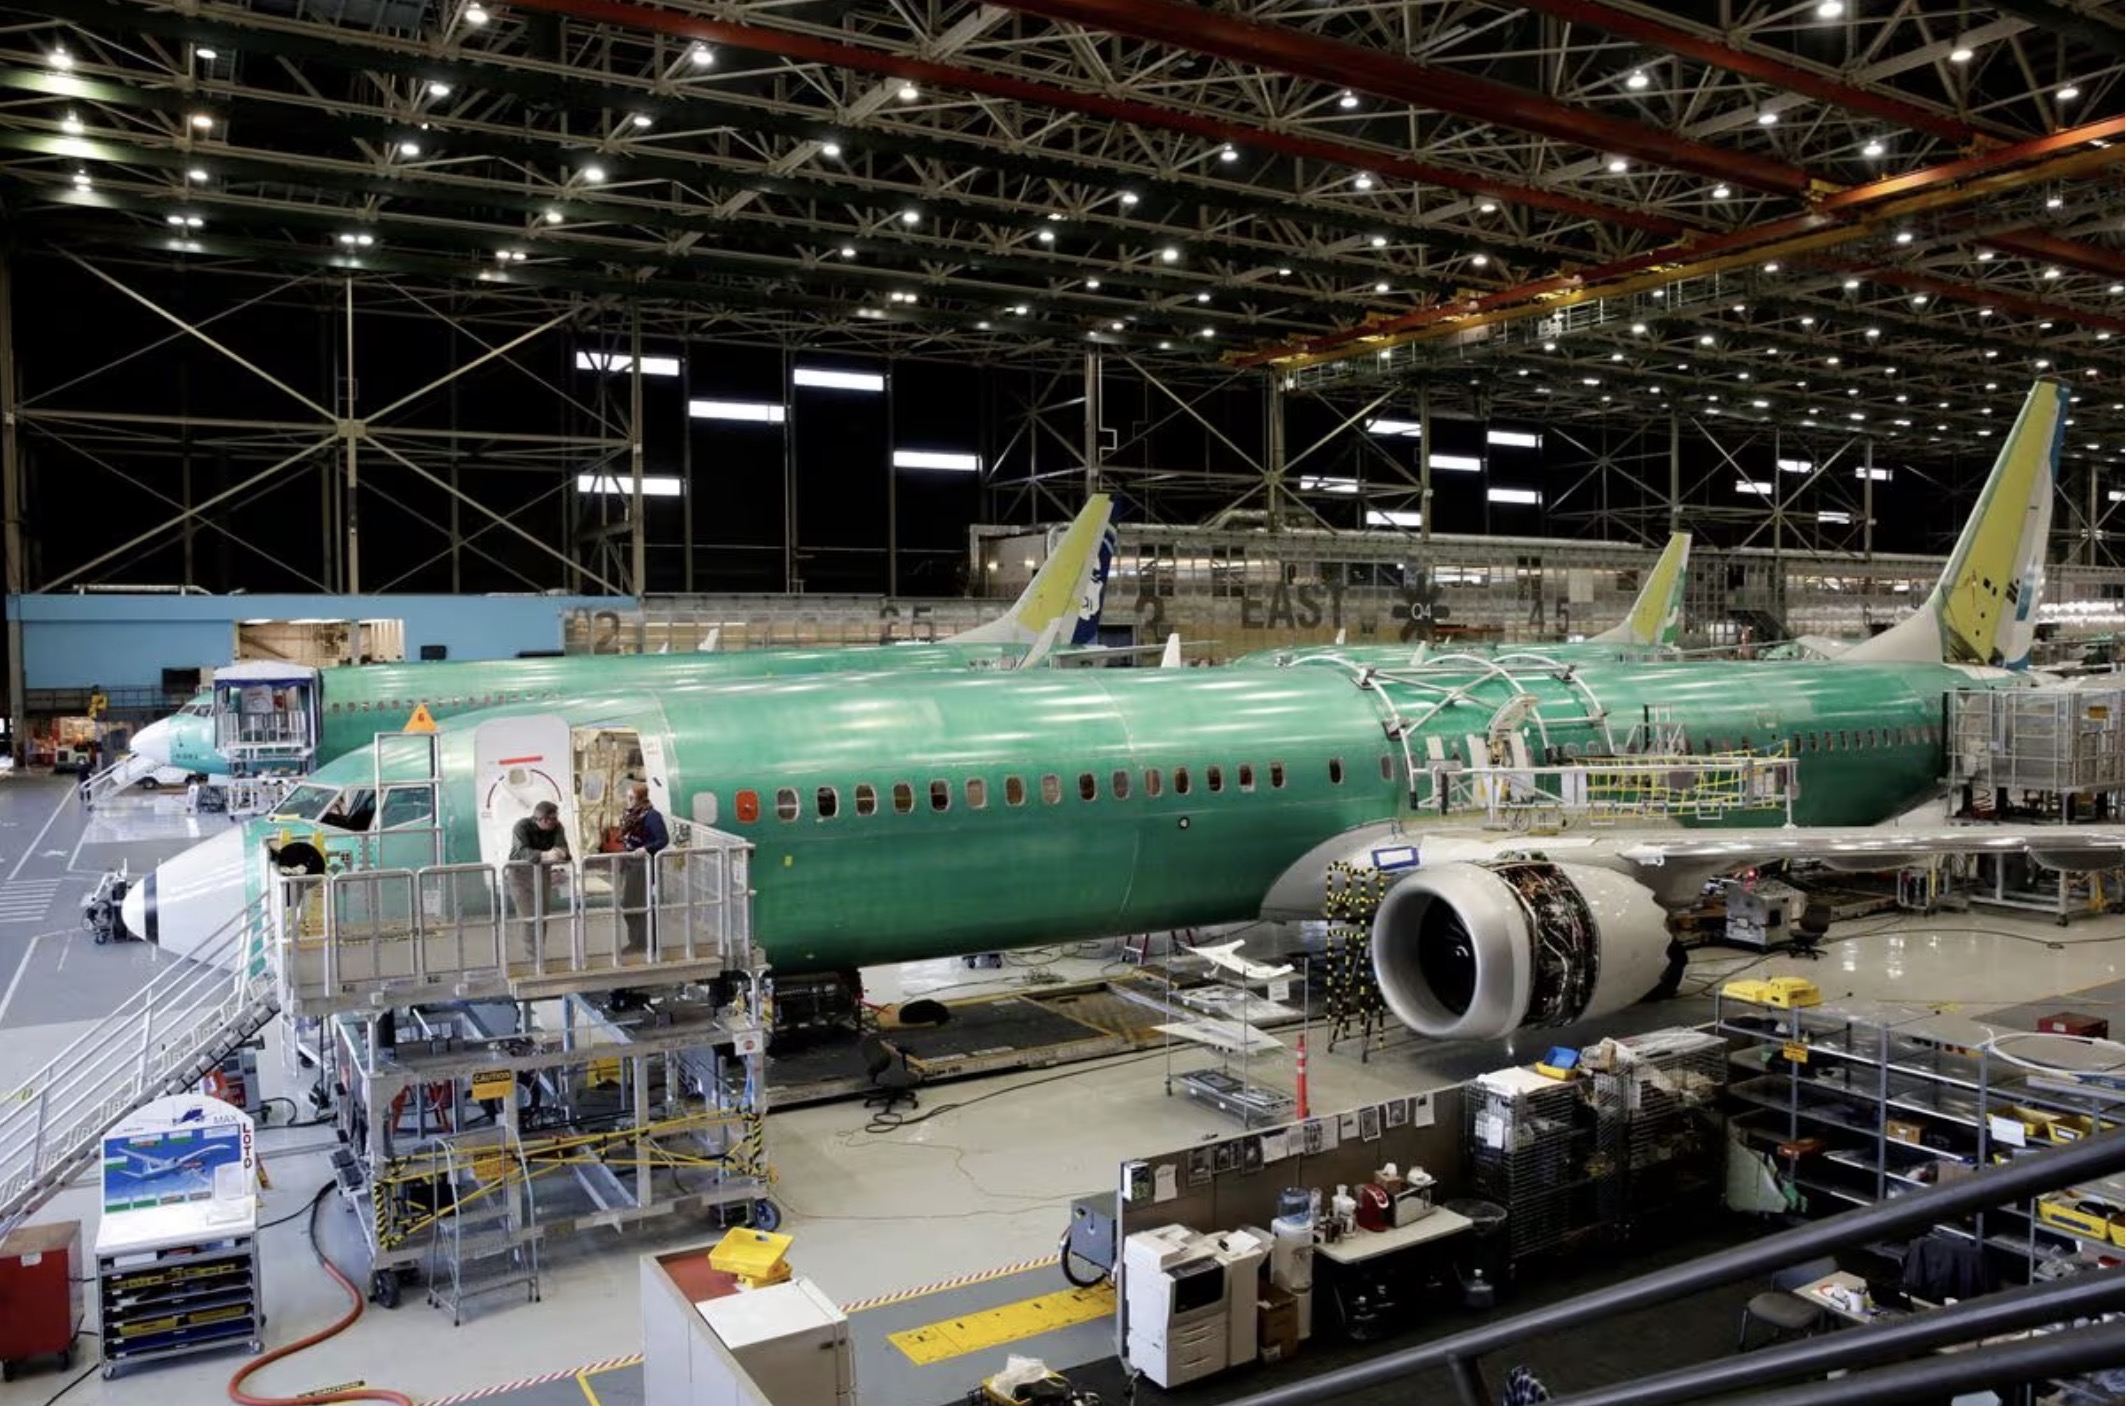 Boeing's 737 MAX 9 is pictured under construction at their production facility in Renton, Washington, U.S. /Reuters